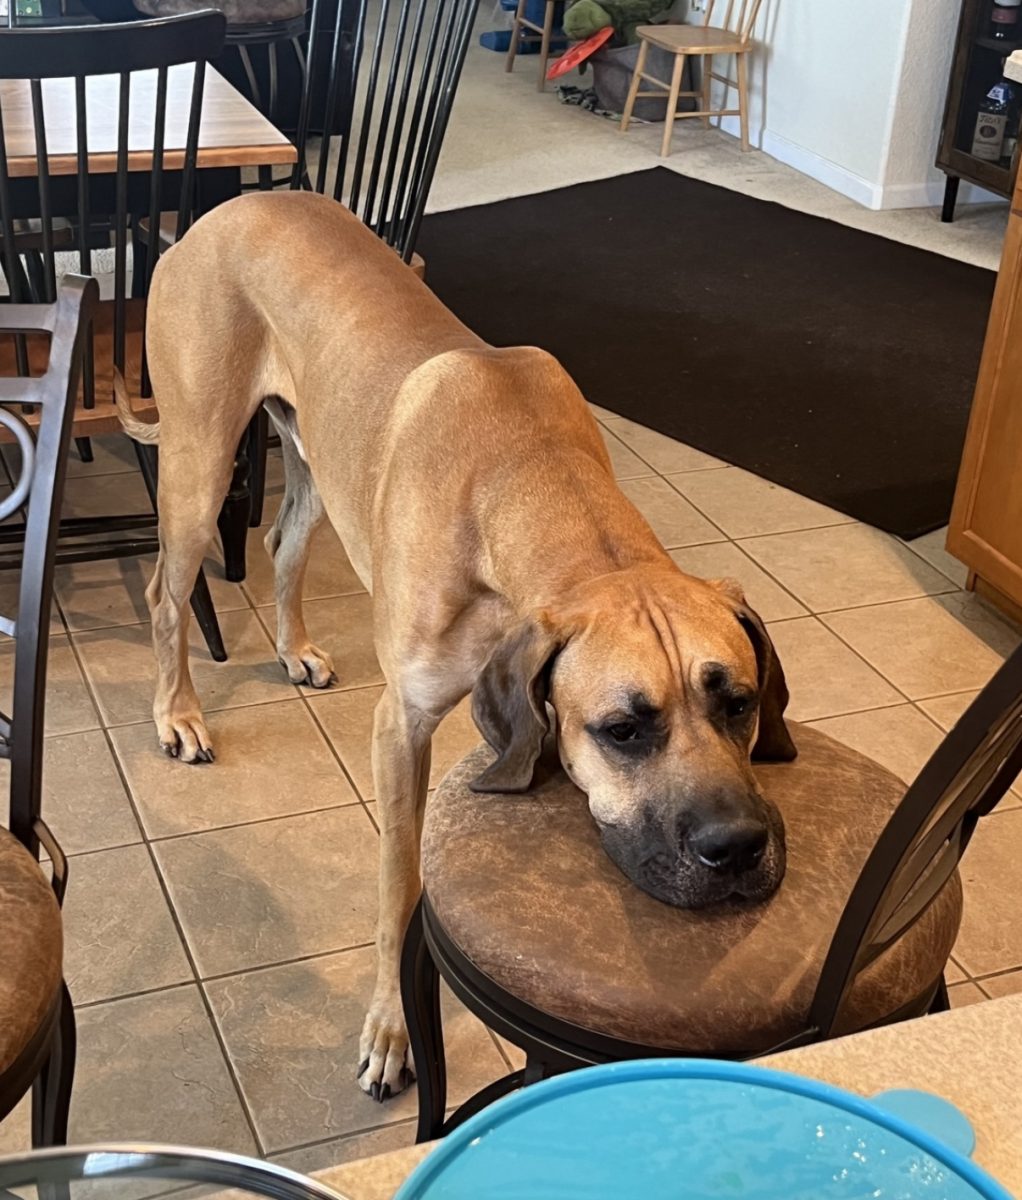 Big dogs have big heads, and King is definitely no exception. He stops at chairs, tables, handrails, counters, and anything else he can reach in order to rest his neck.